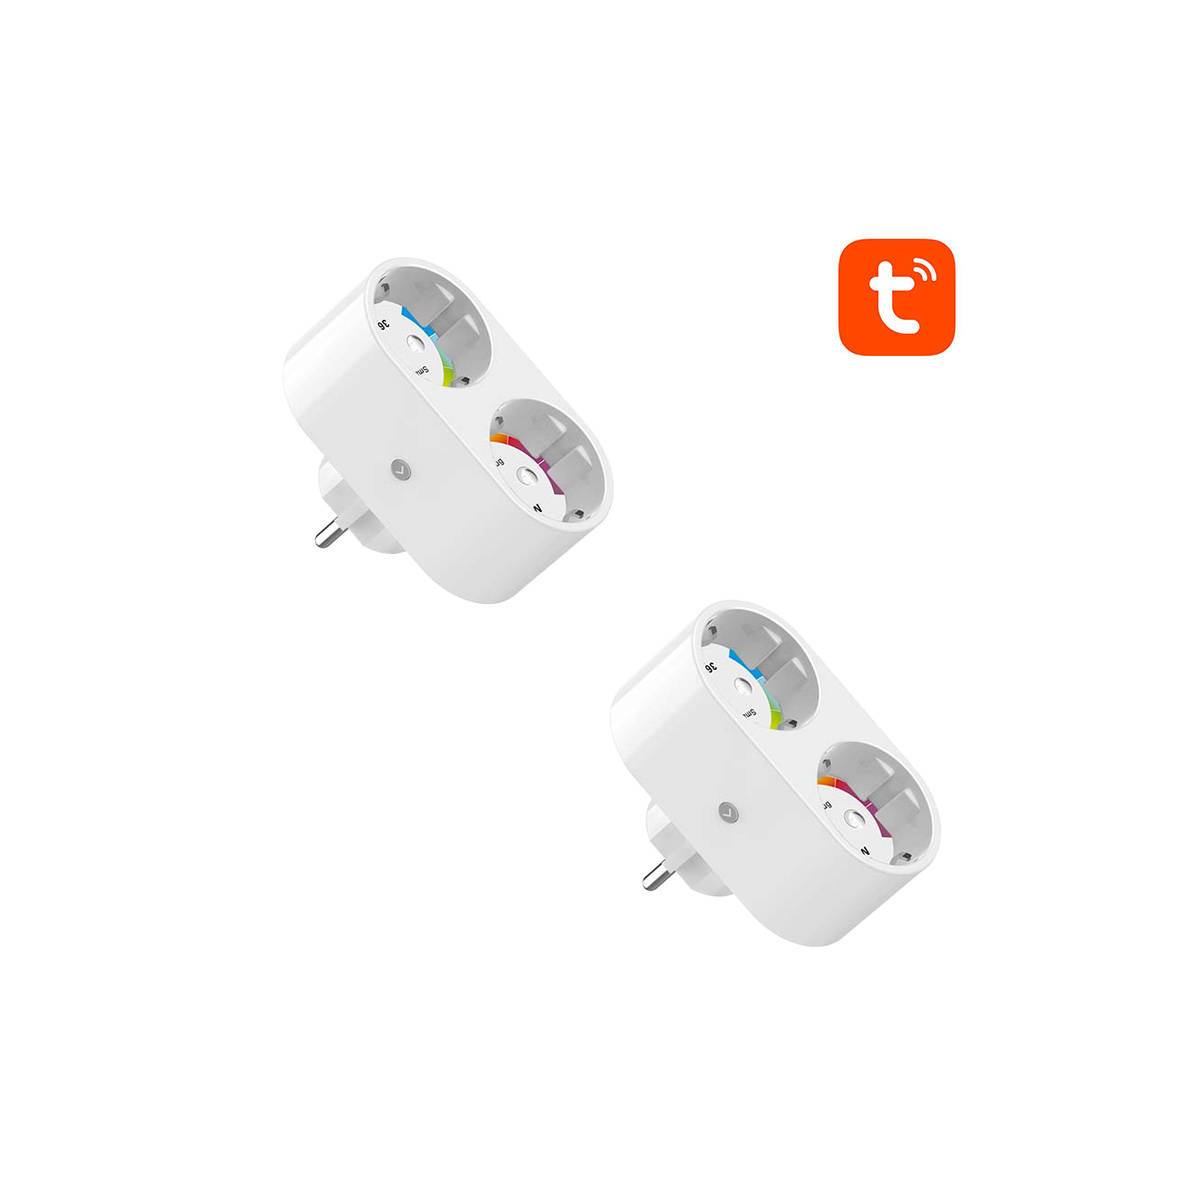 https://cablesformac.com/58689-thickbox_default/gosund-2-pack-smart-double-2x-power-plug-with-wi-fi-alexa-google-home.jpg